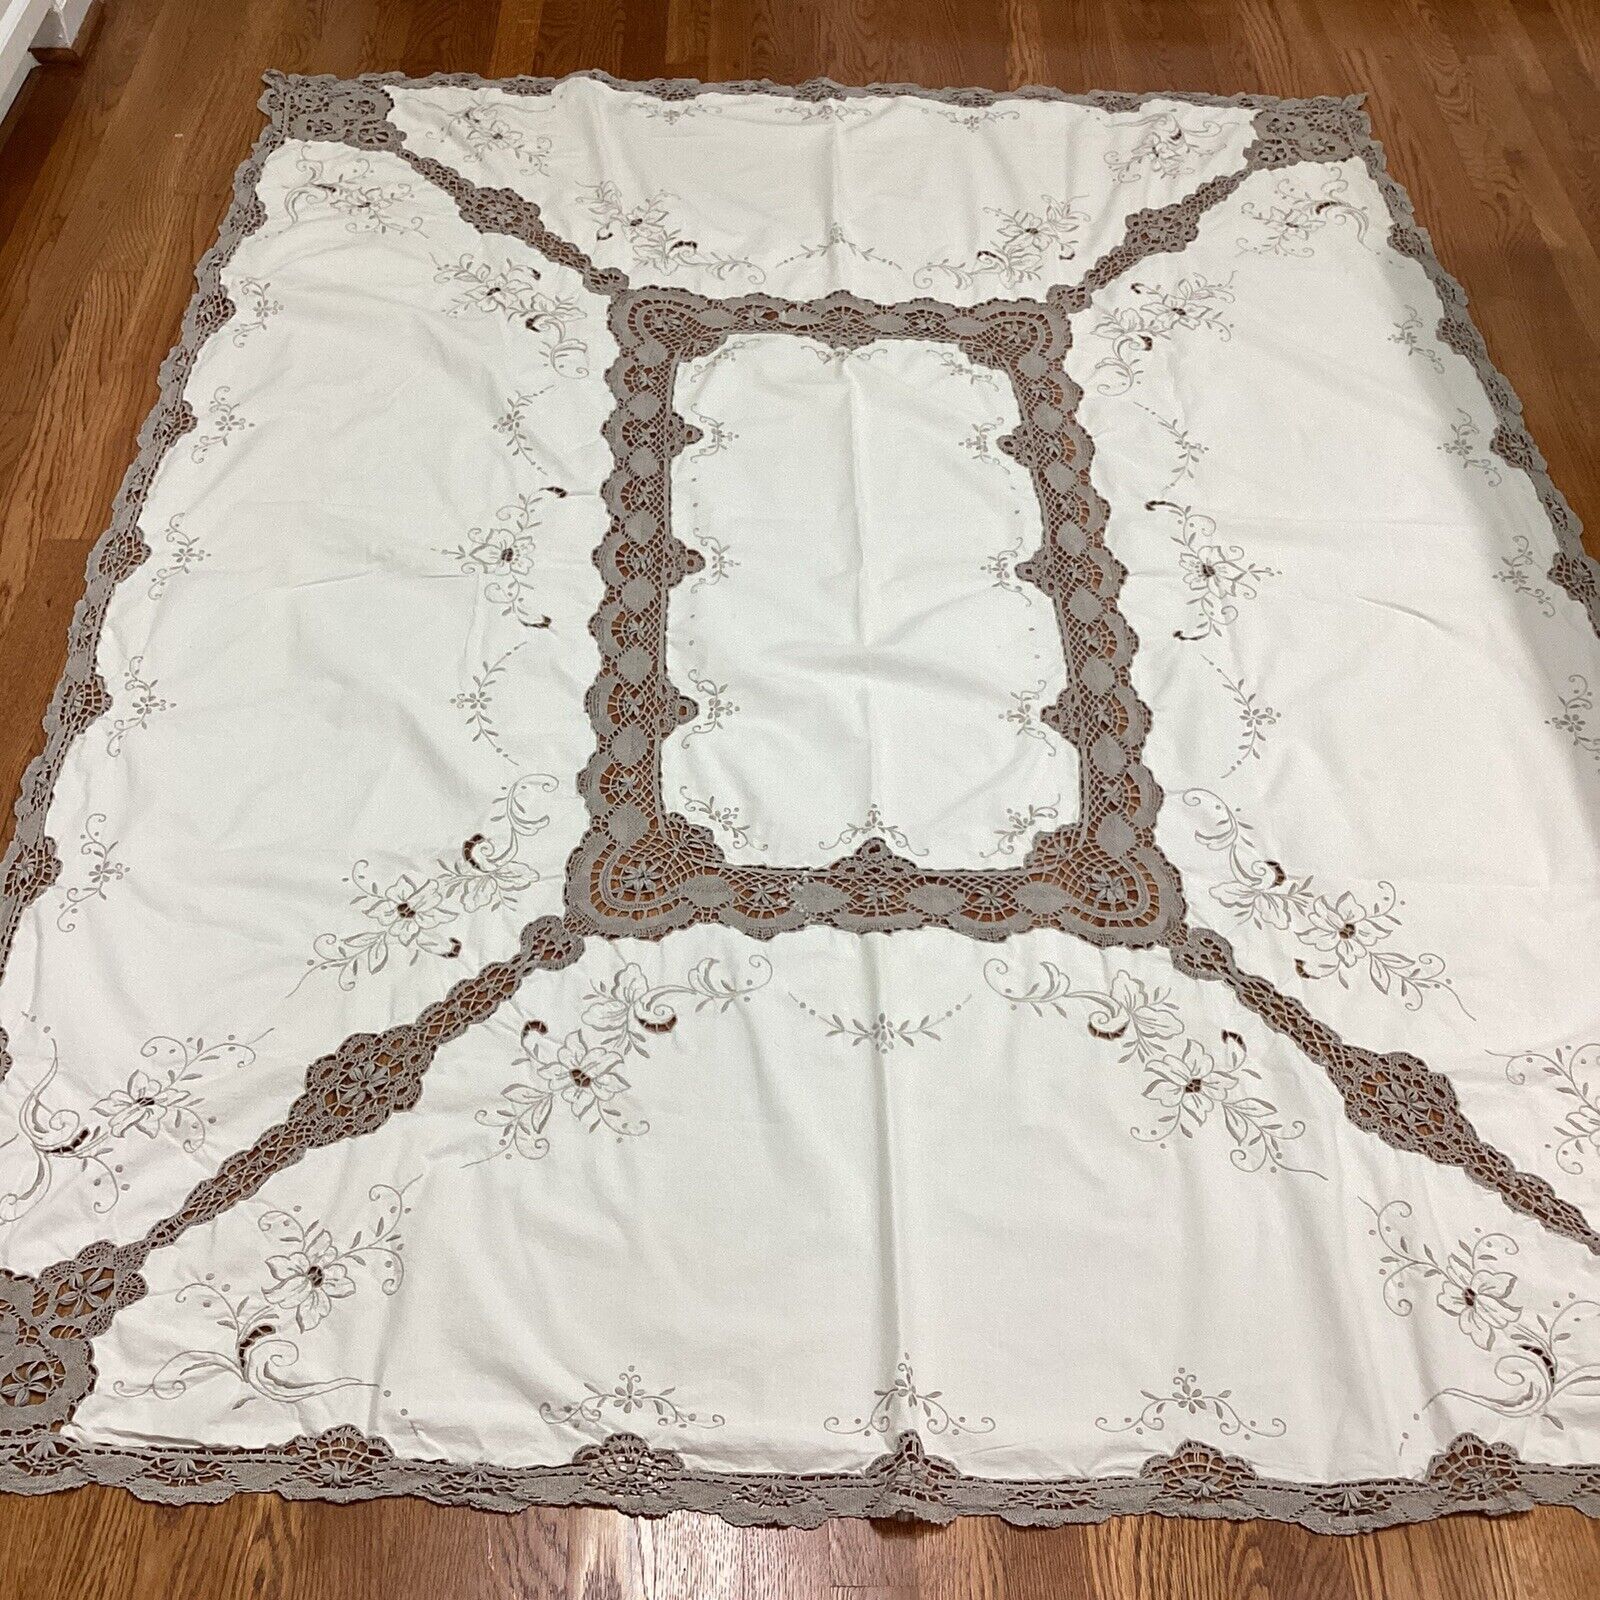 75”x 60” Antique Handmade French Off White Lace Embroidered Tablecloth Cotton 